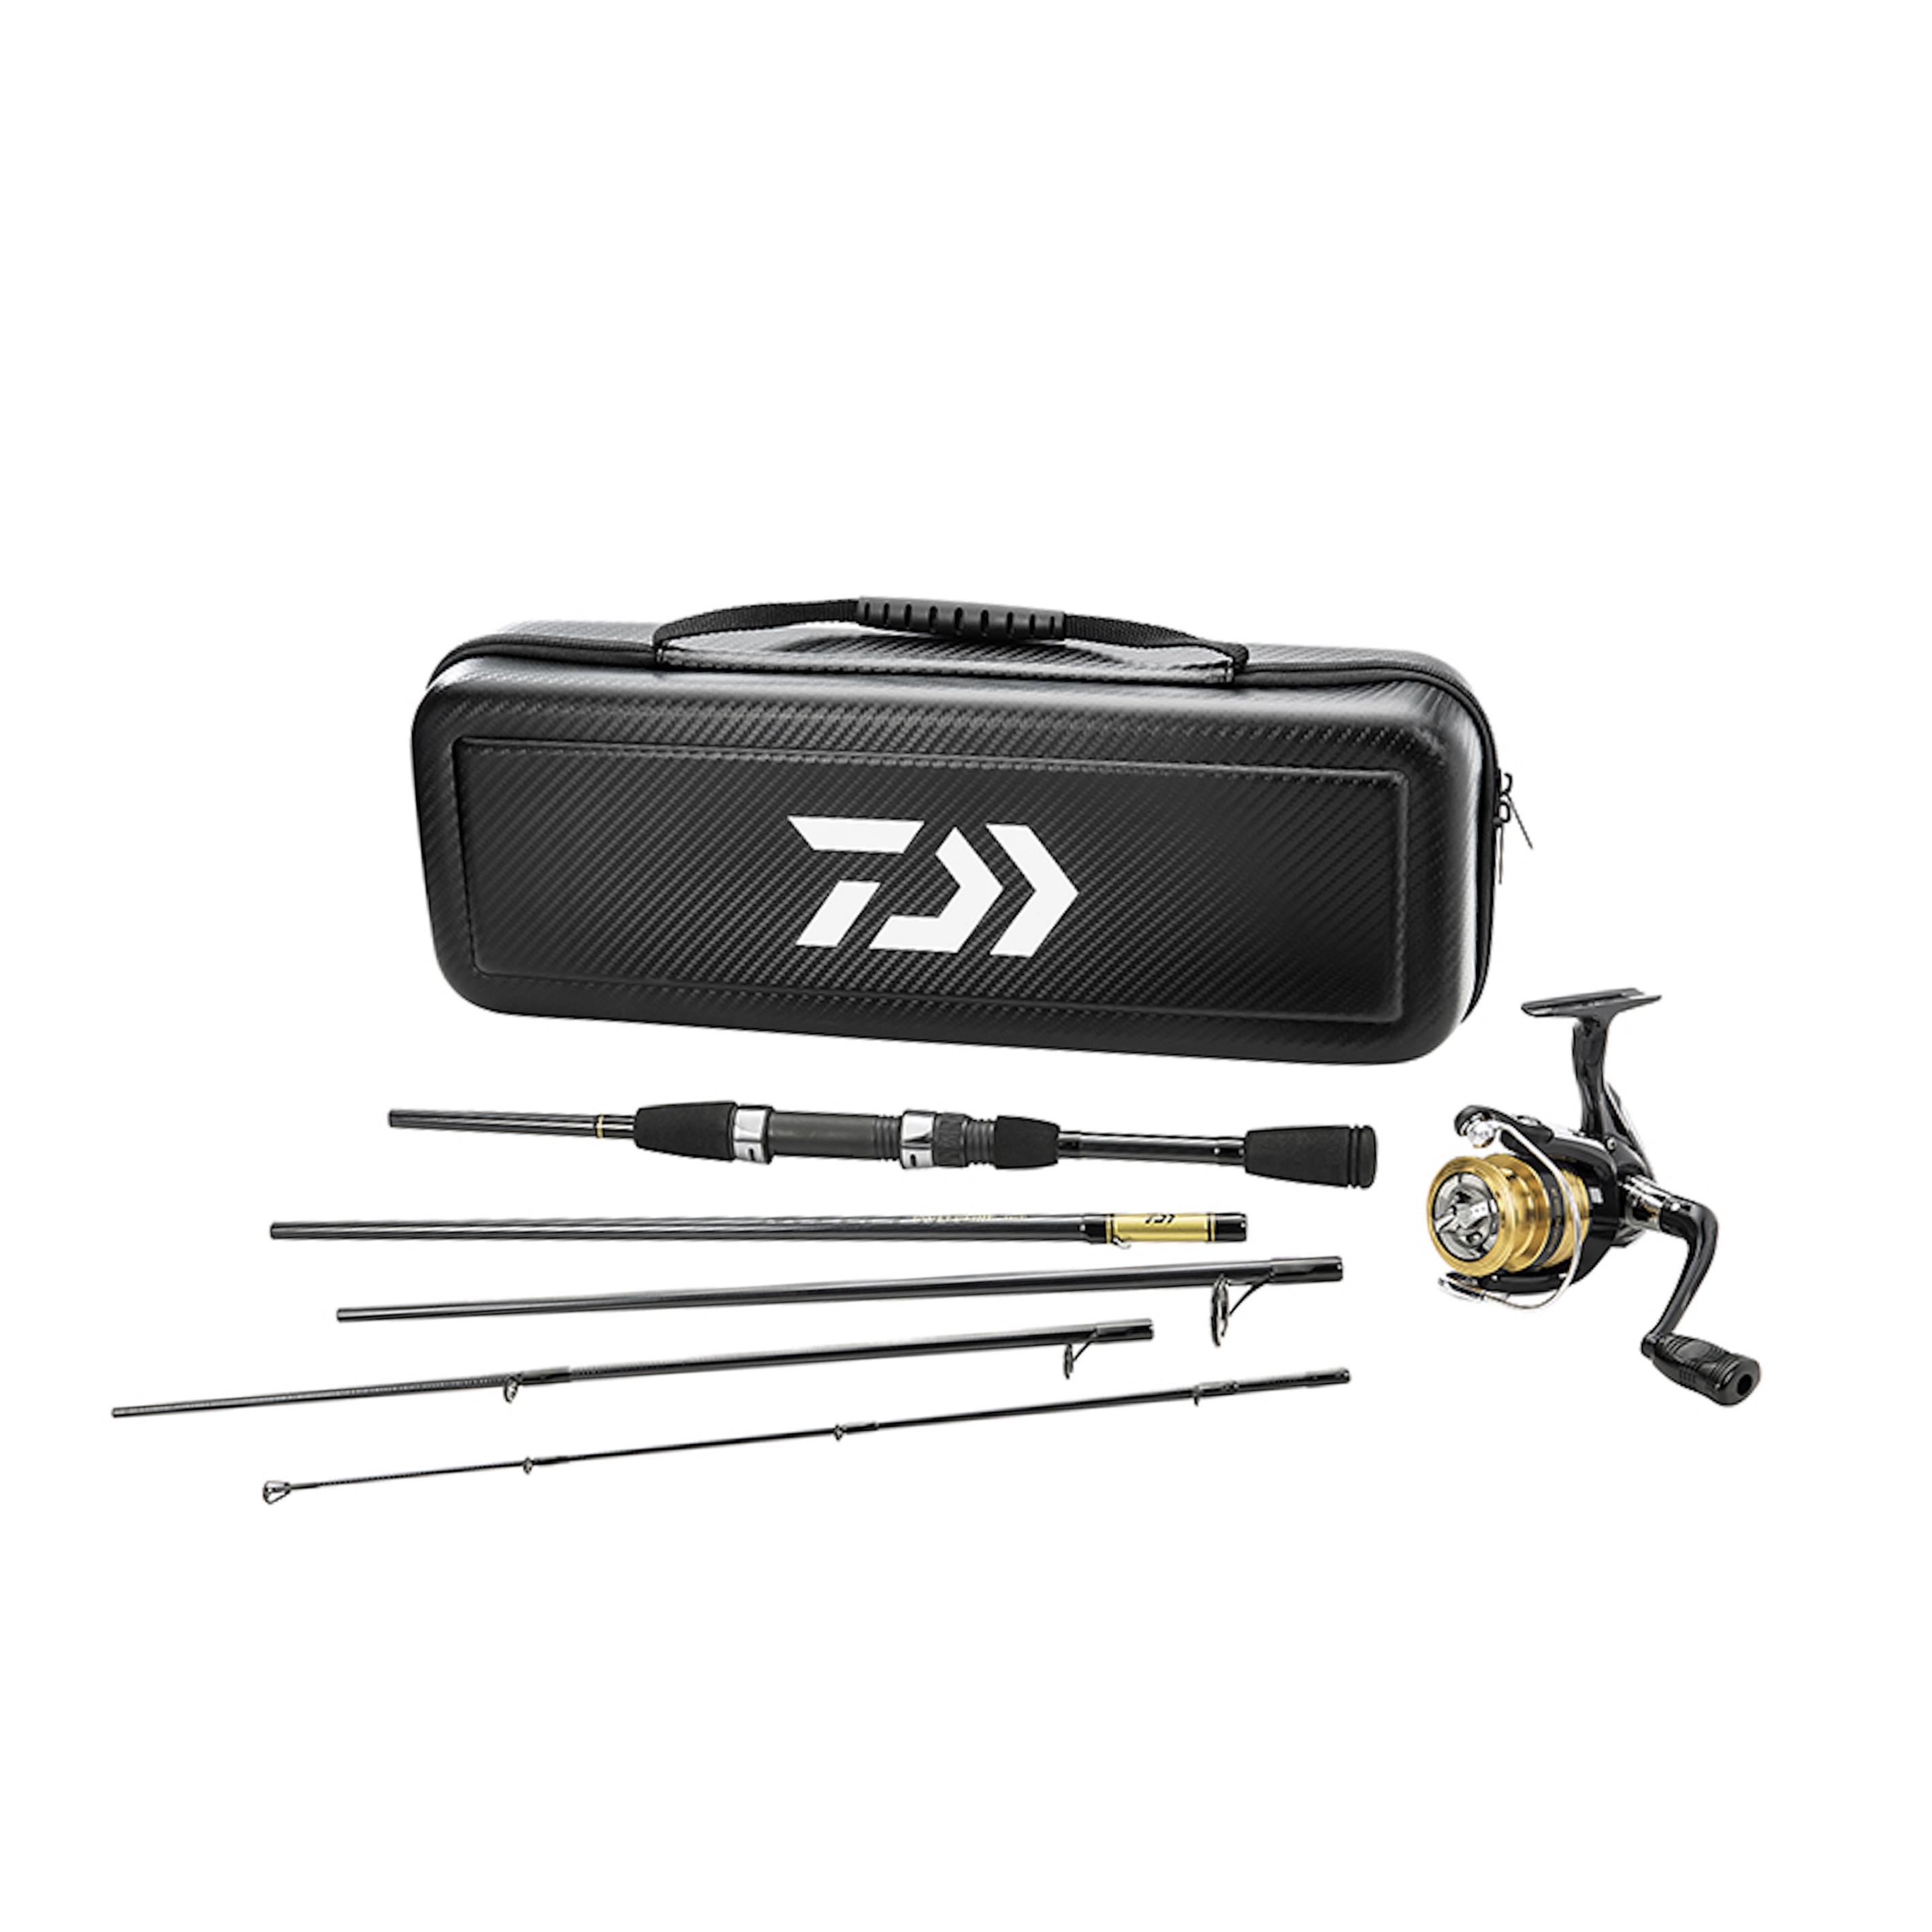 Daiwa Carbon Case Travel Pre-Mounted Freshwater Spinning Combo